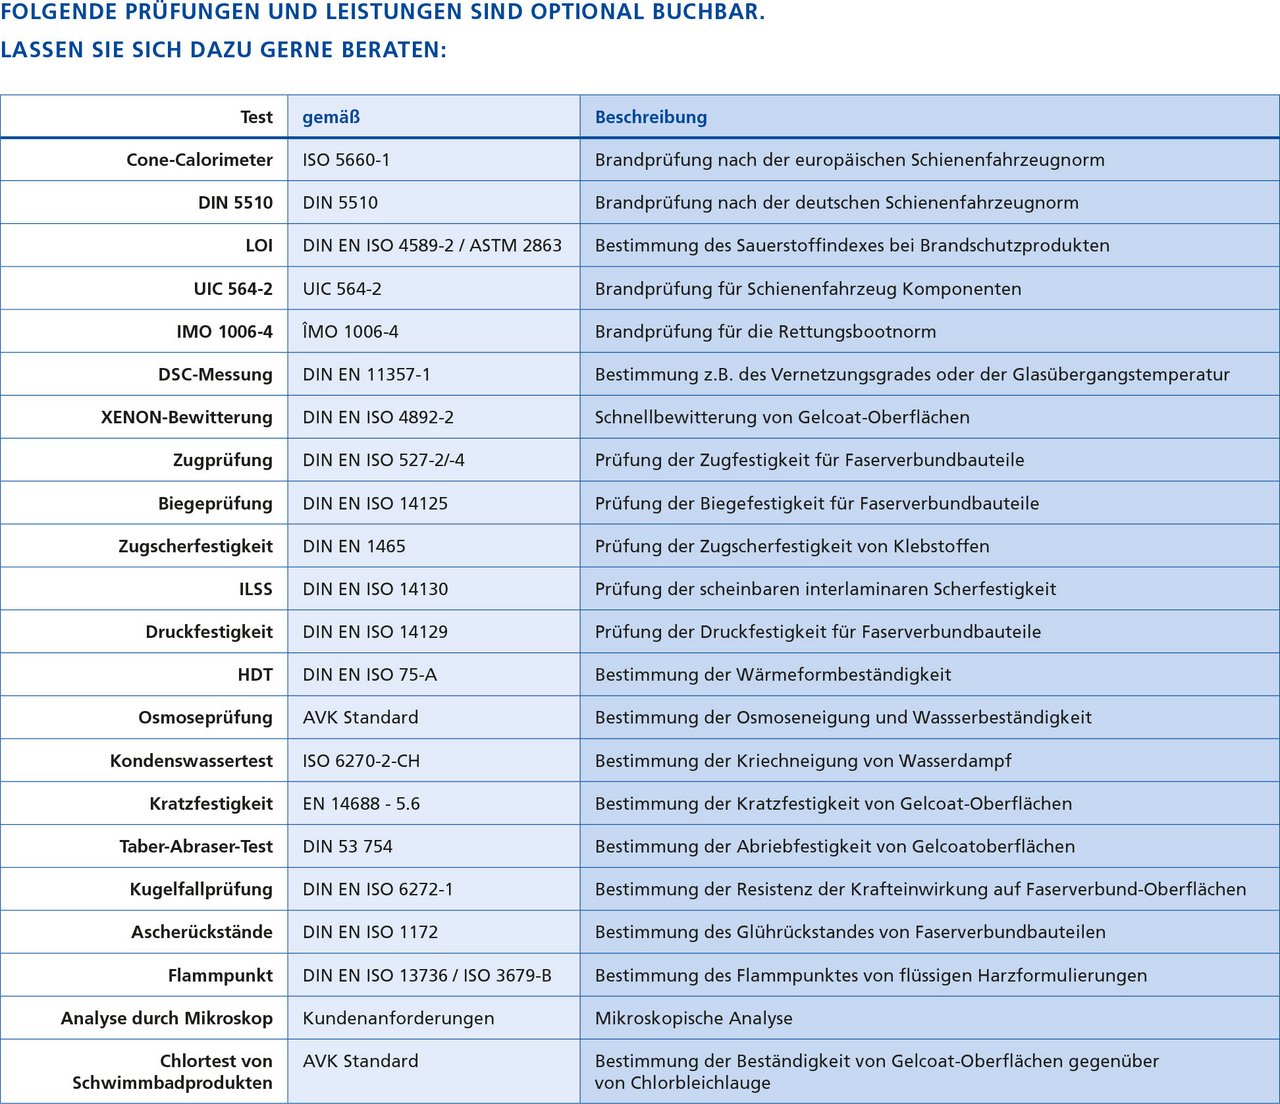 Table of individual tests and services in the laboratory service